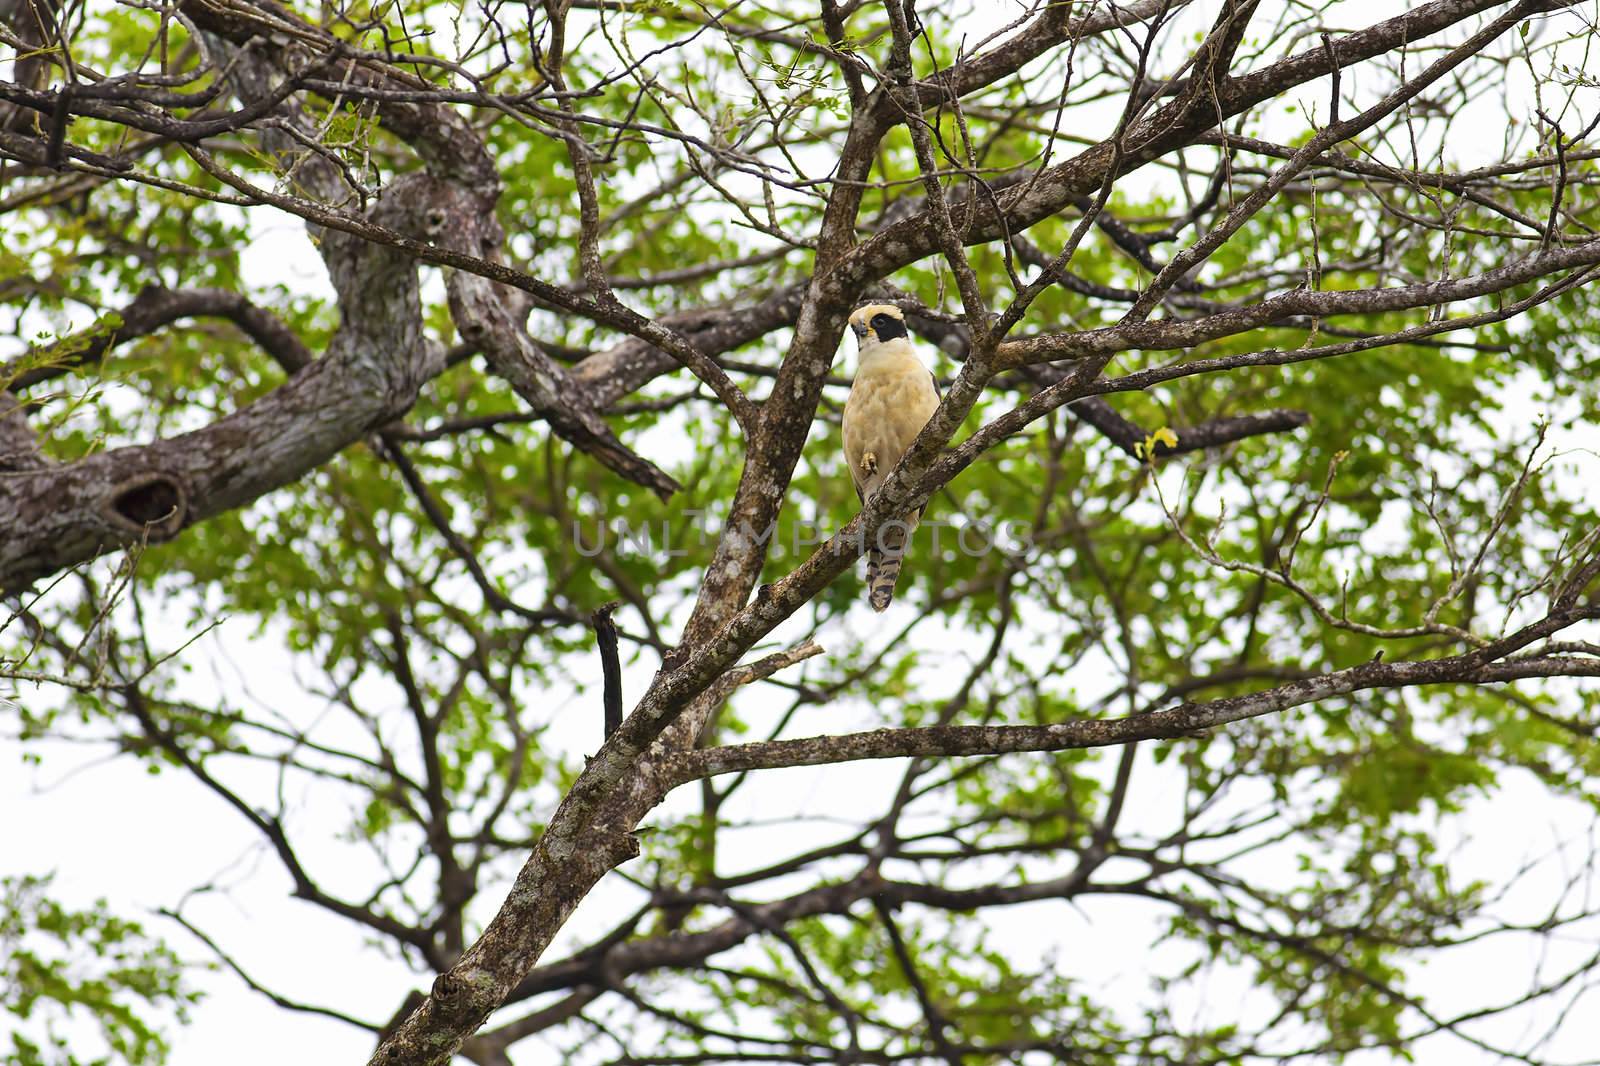 A laughing falcon in the trees on a rainy day, Costa Rica